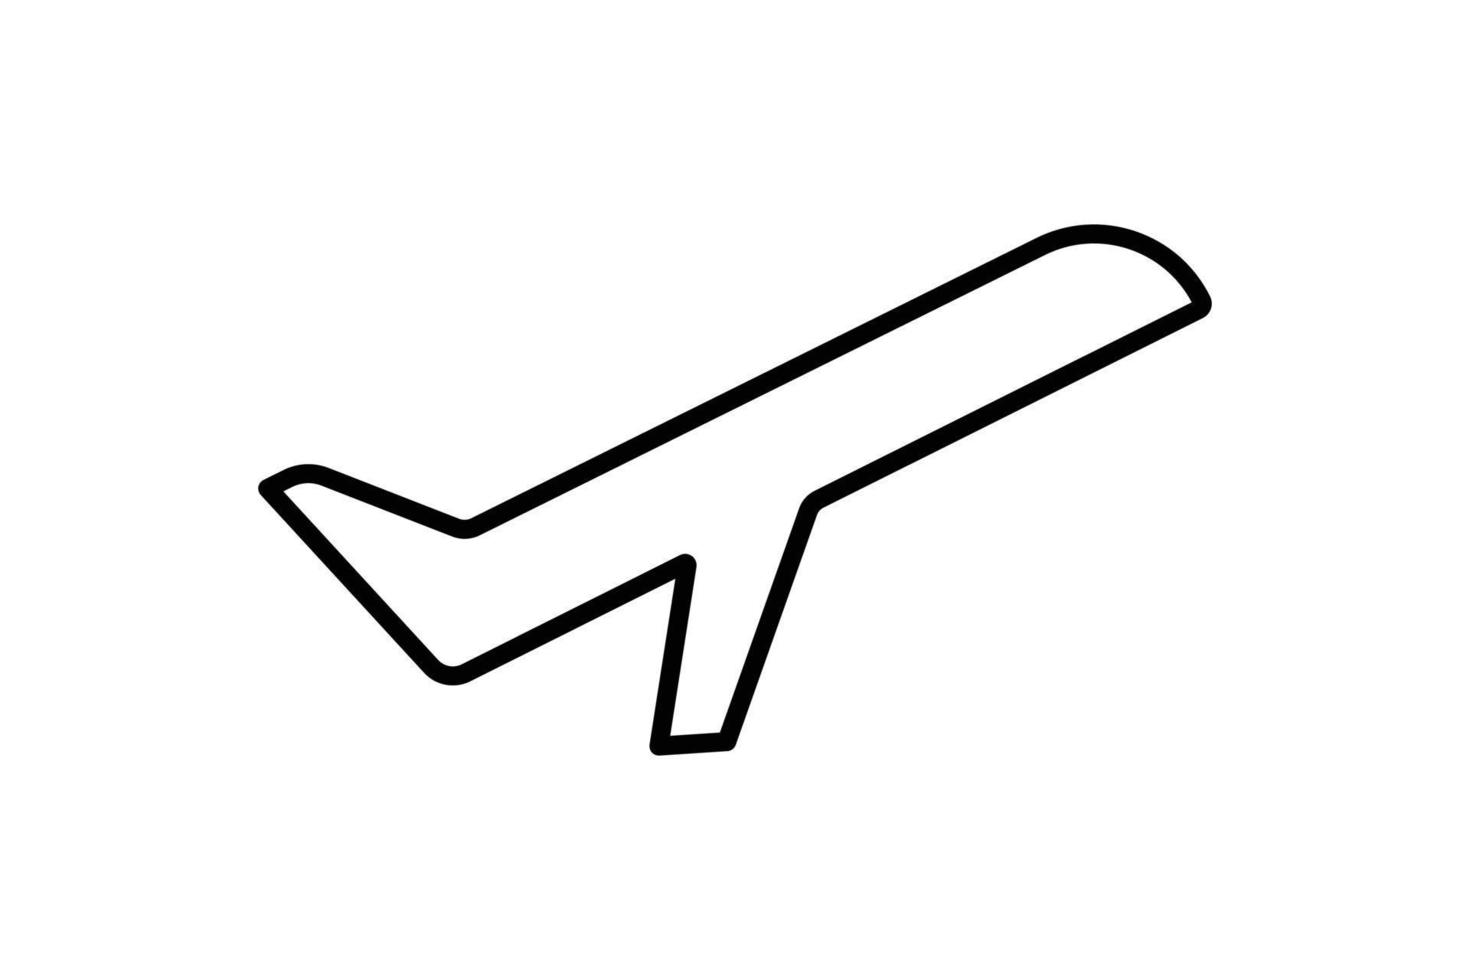 Airplane icon illustration. icon related to transportation, travel. Line icon style. Simple vector design editable